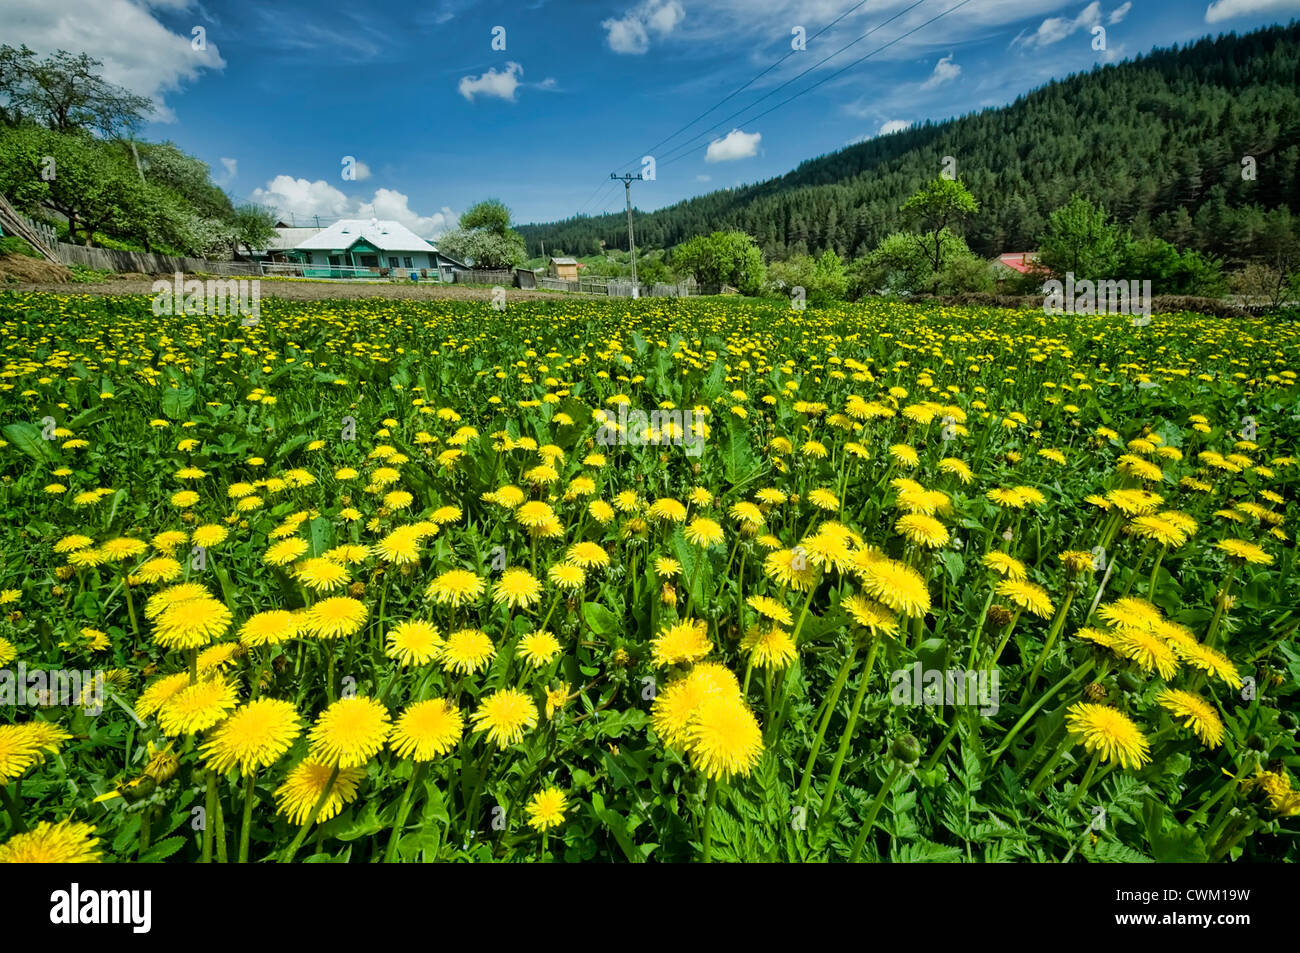 Meadow with yellow dandelions in village Stock Photo